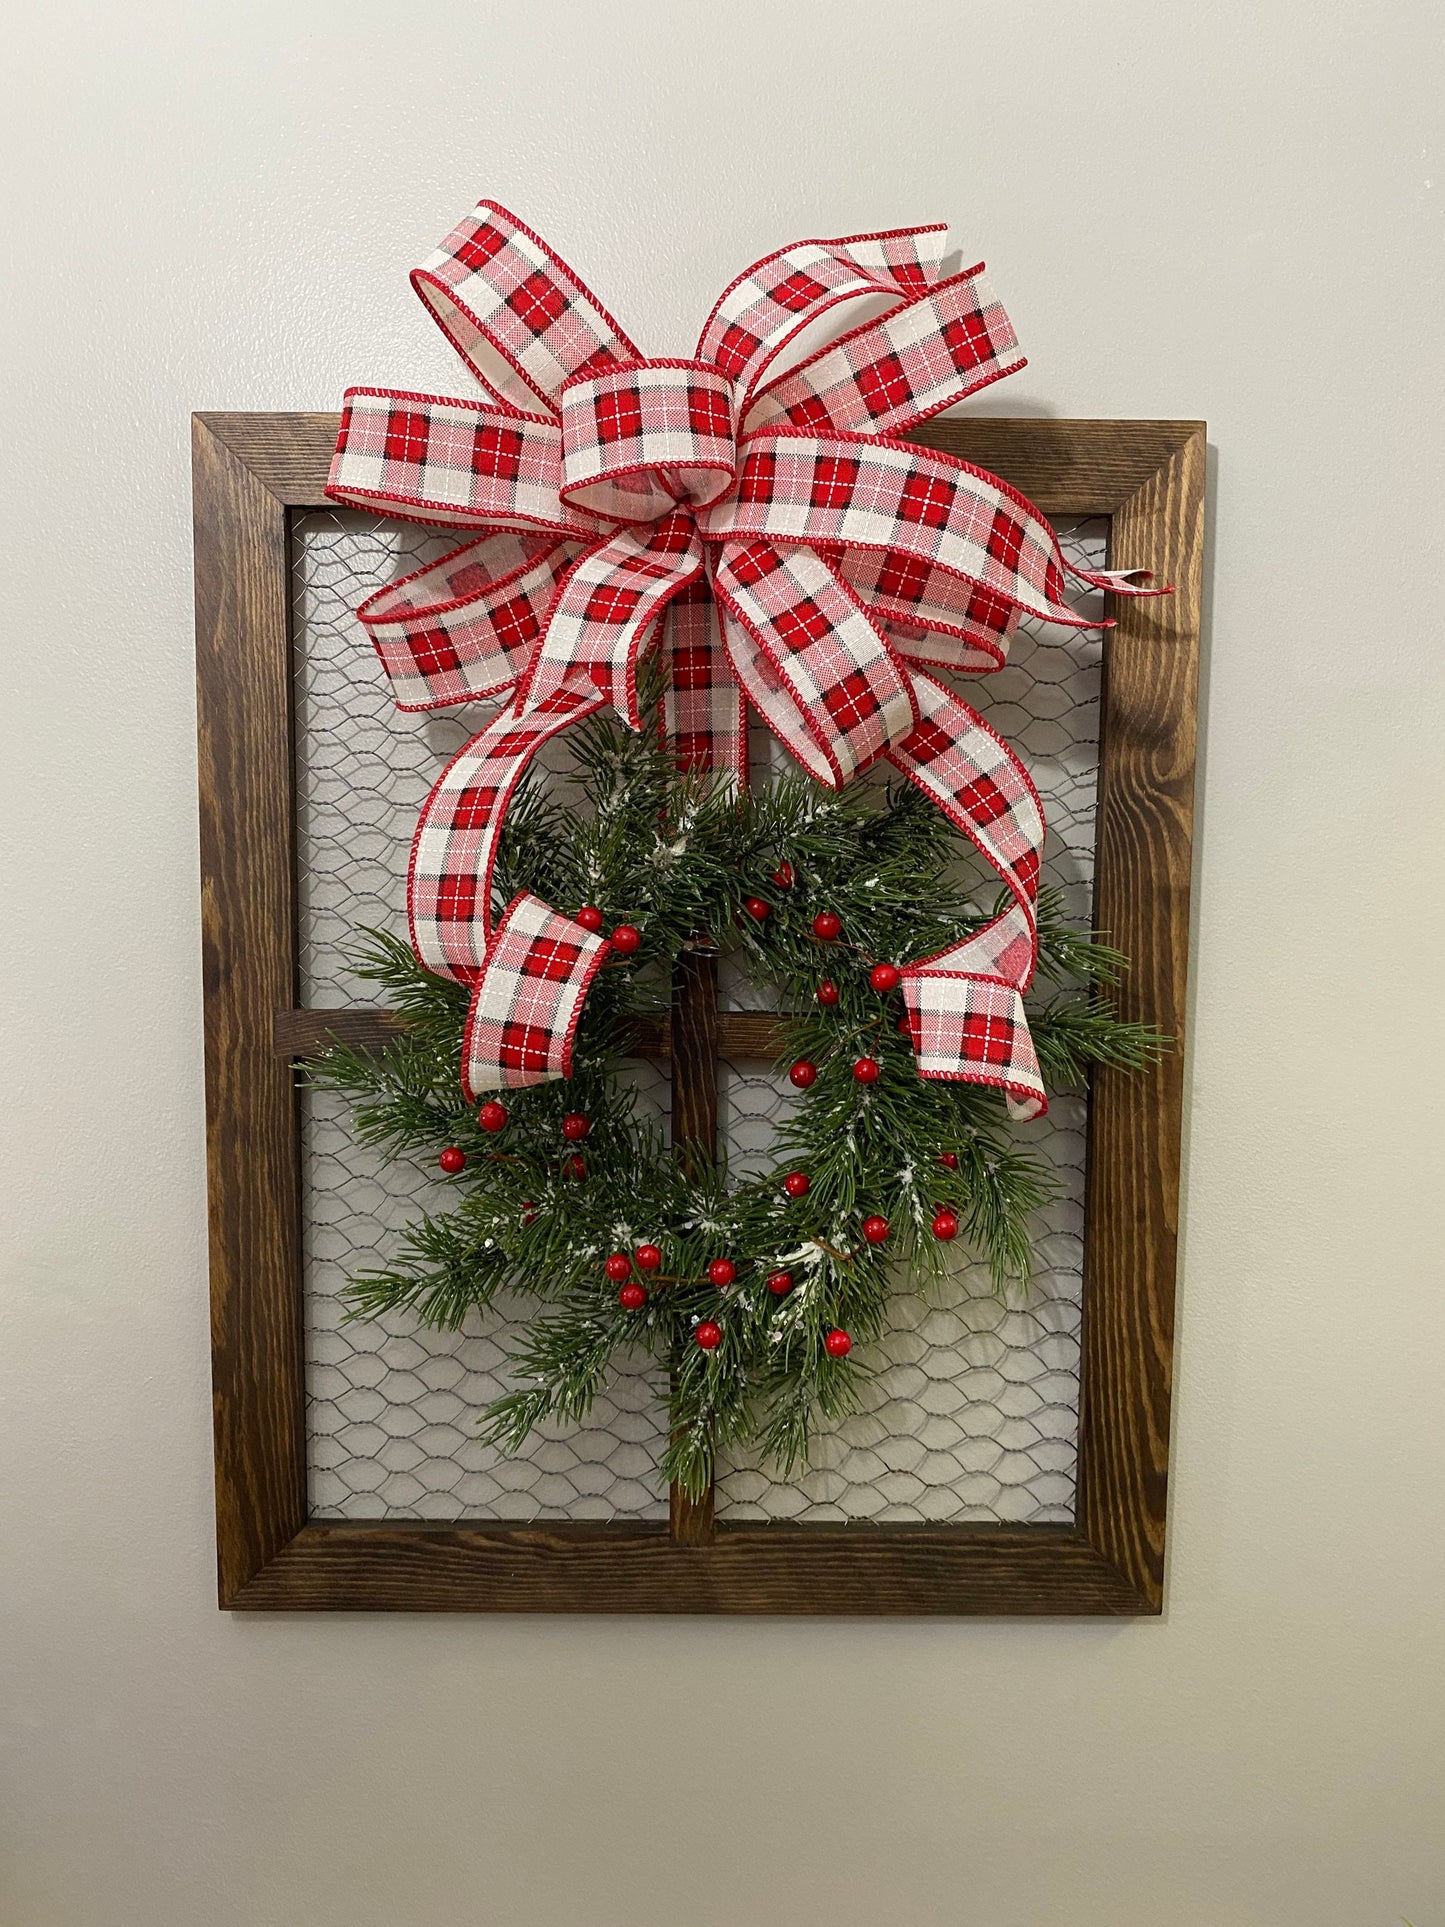 Chicken Wire Window with Christmas Wreath, Christmas Mantel Sitter, Xmas Gallery Wall Decor, Wood Frame with Wreath